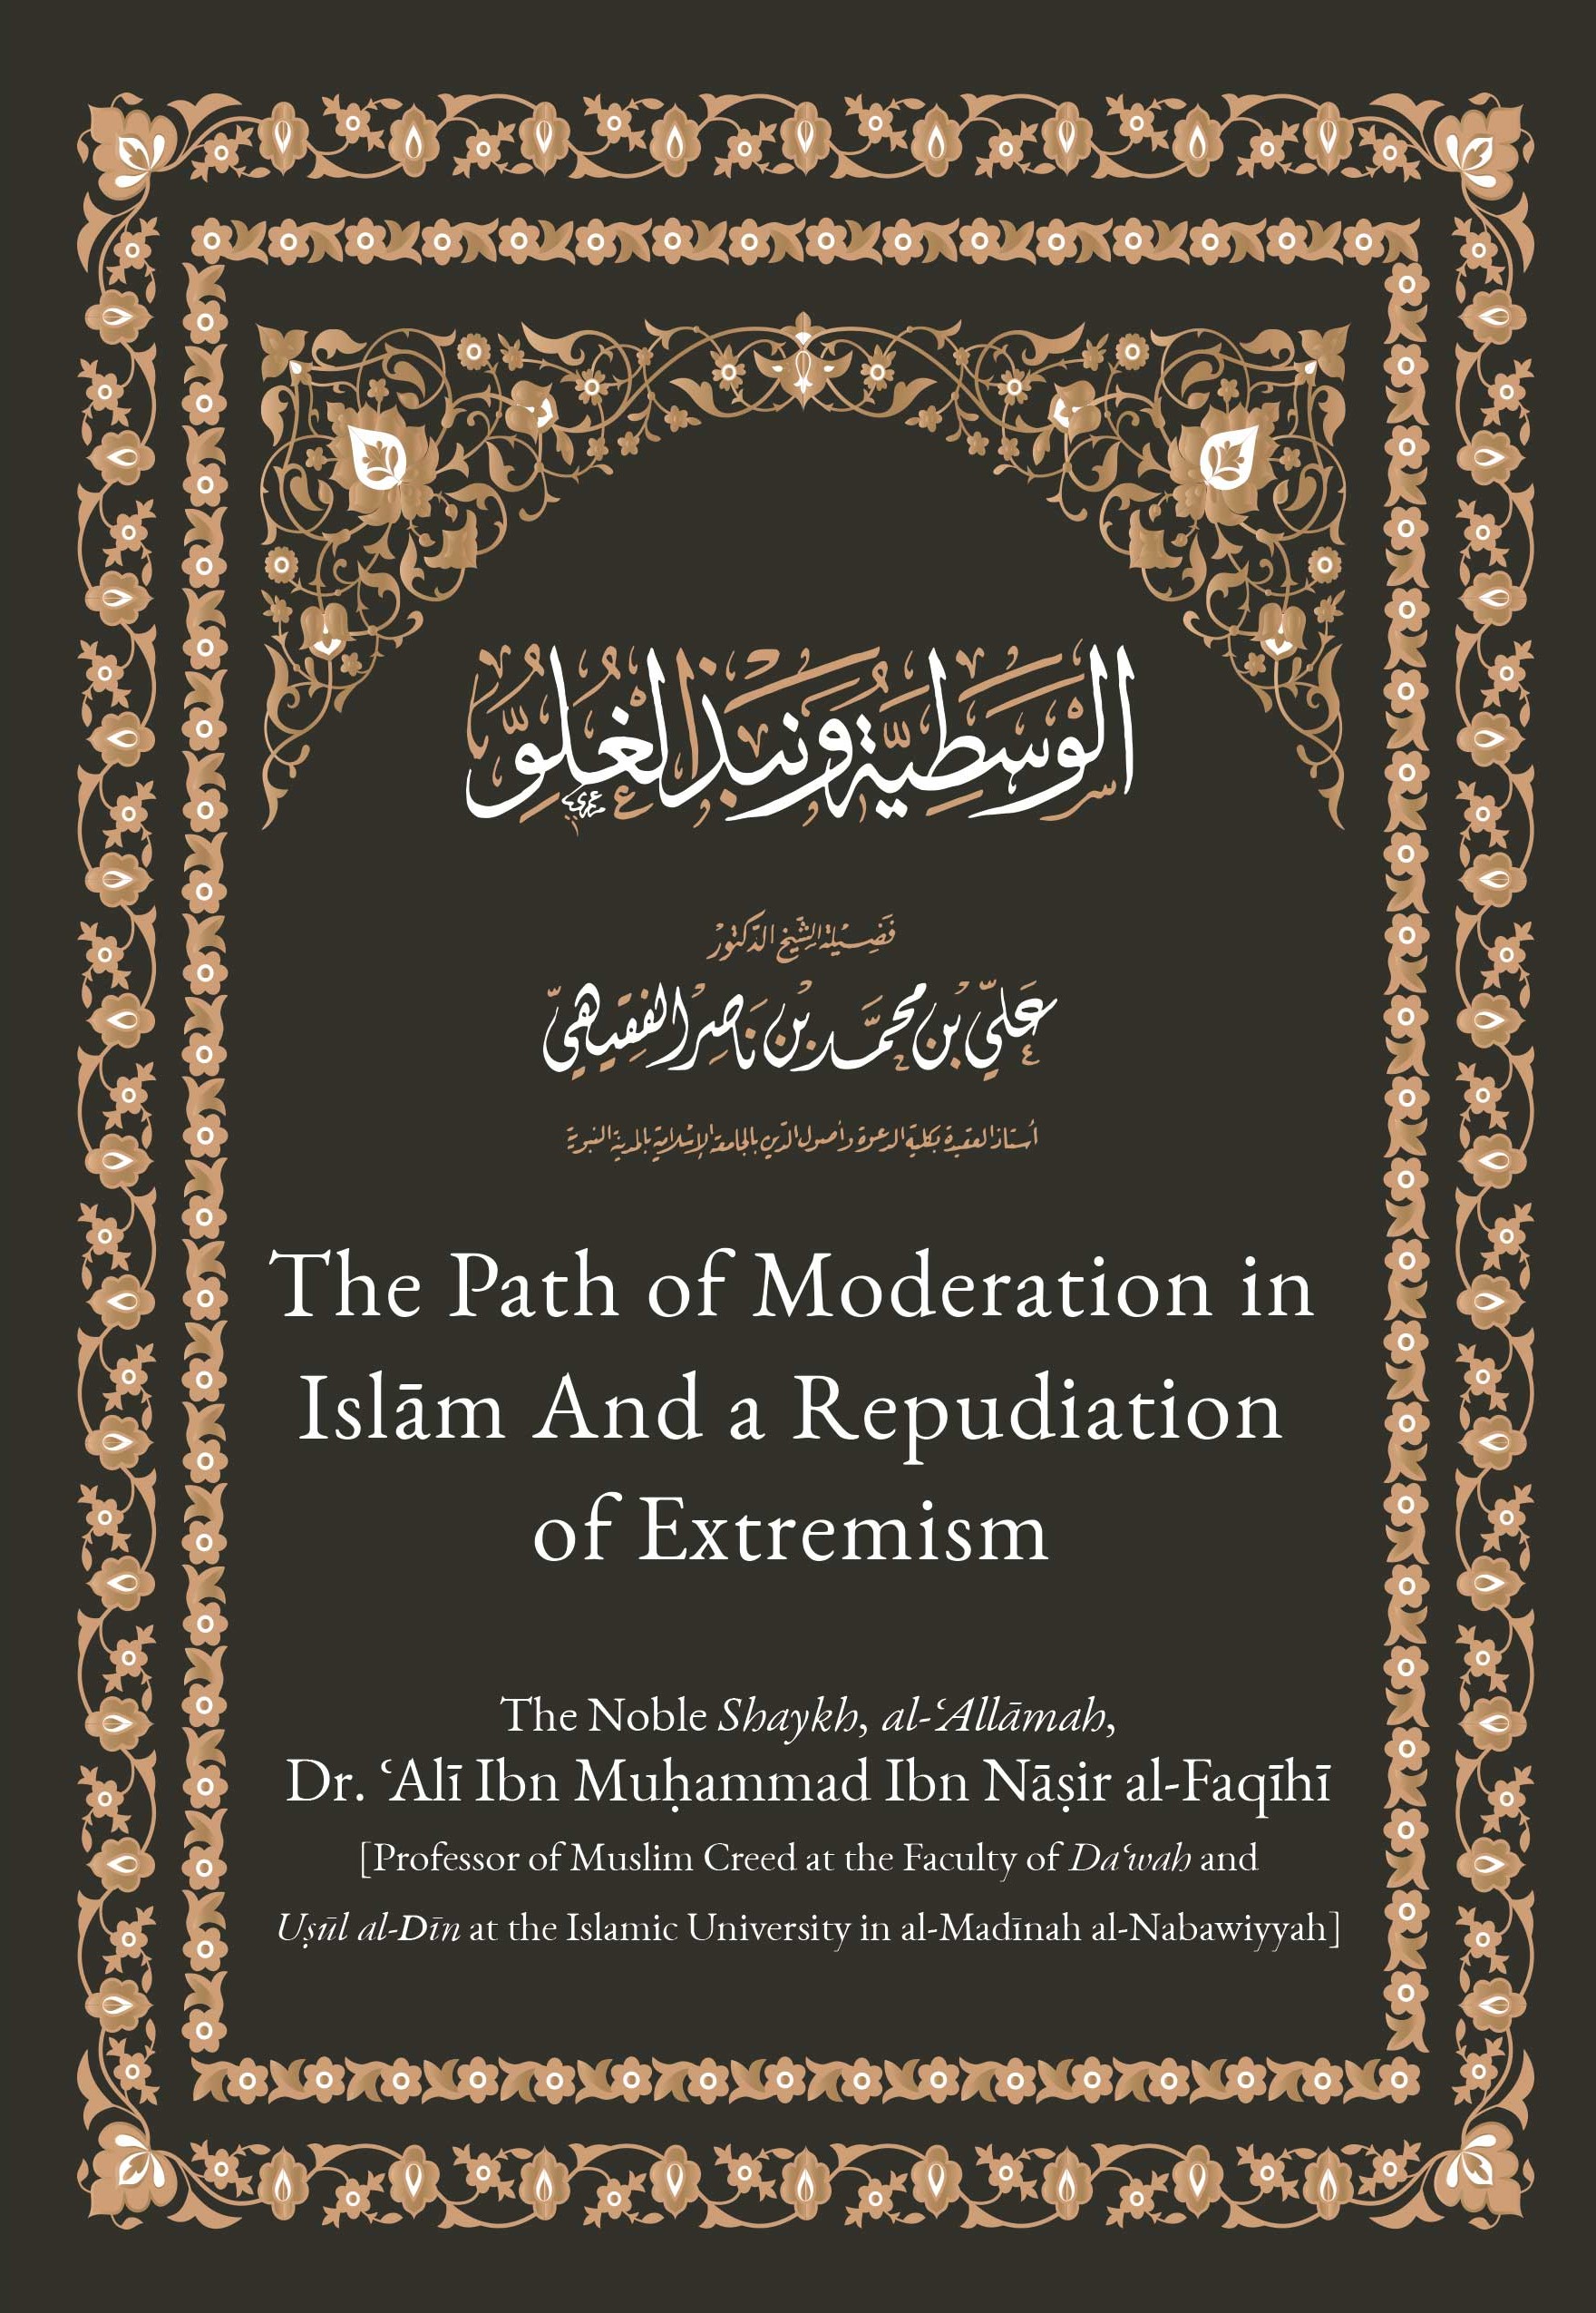 The Path of Moderation in Islam and the Repudiation of Extremism